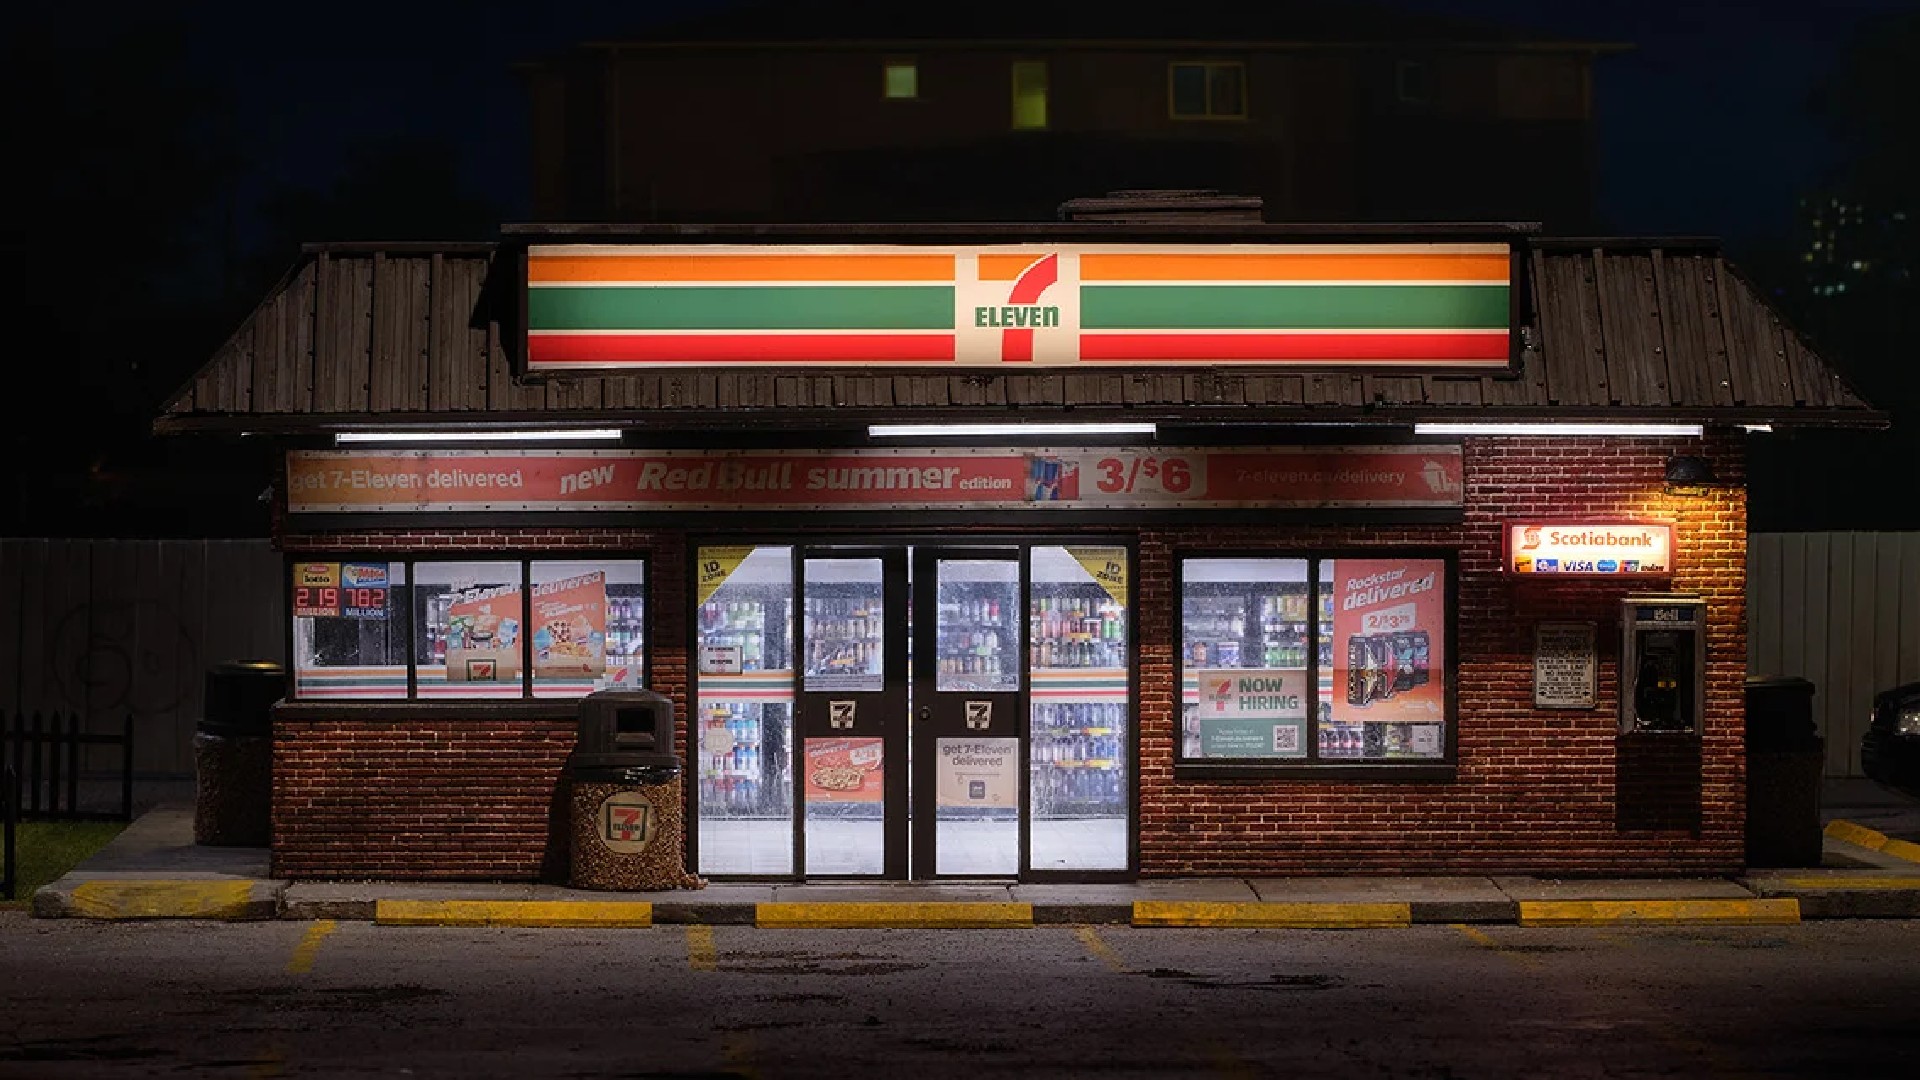 The Realistic Miniature 7-eleven Store Is A Shoebox For Matching Nike Shoes